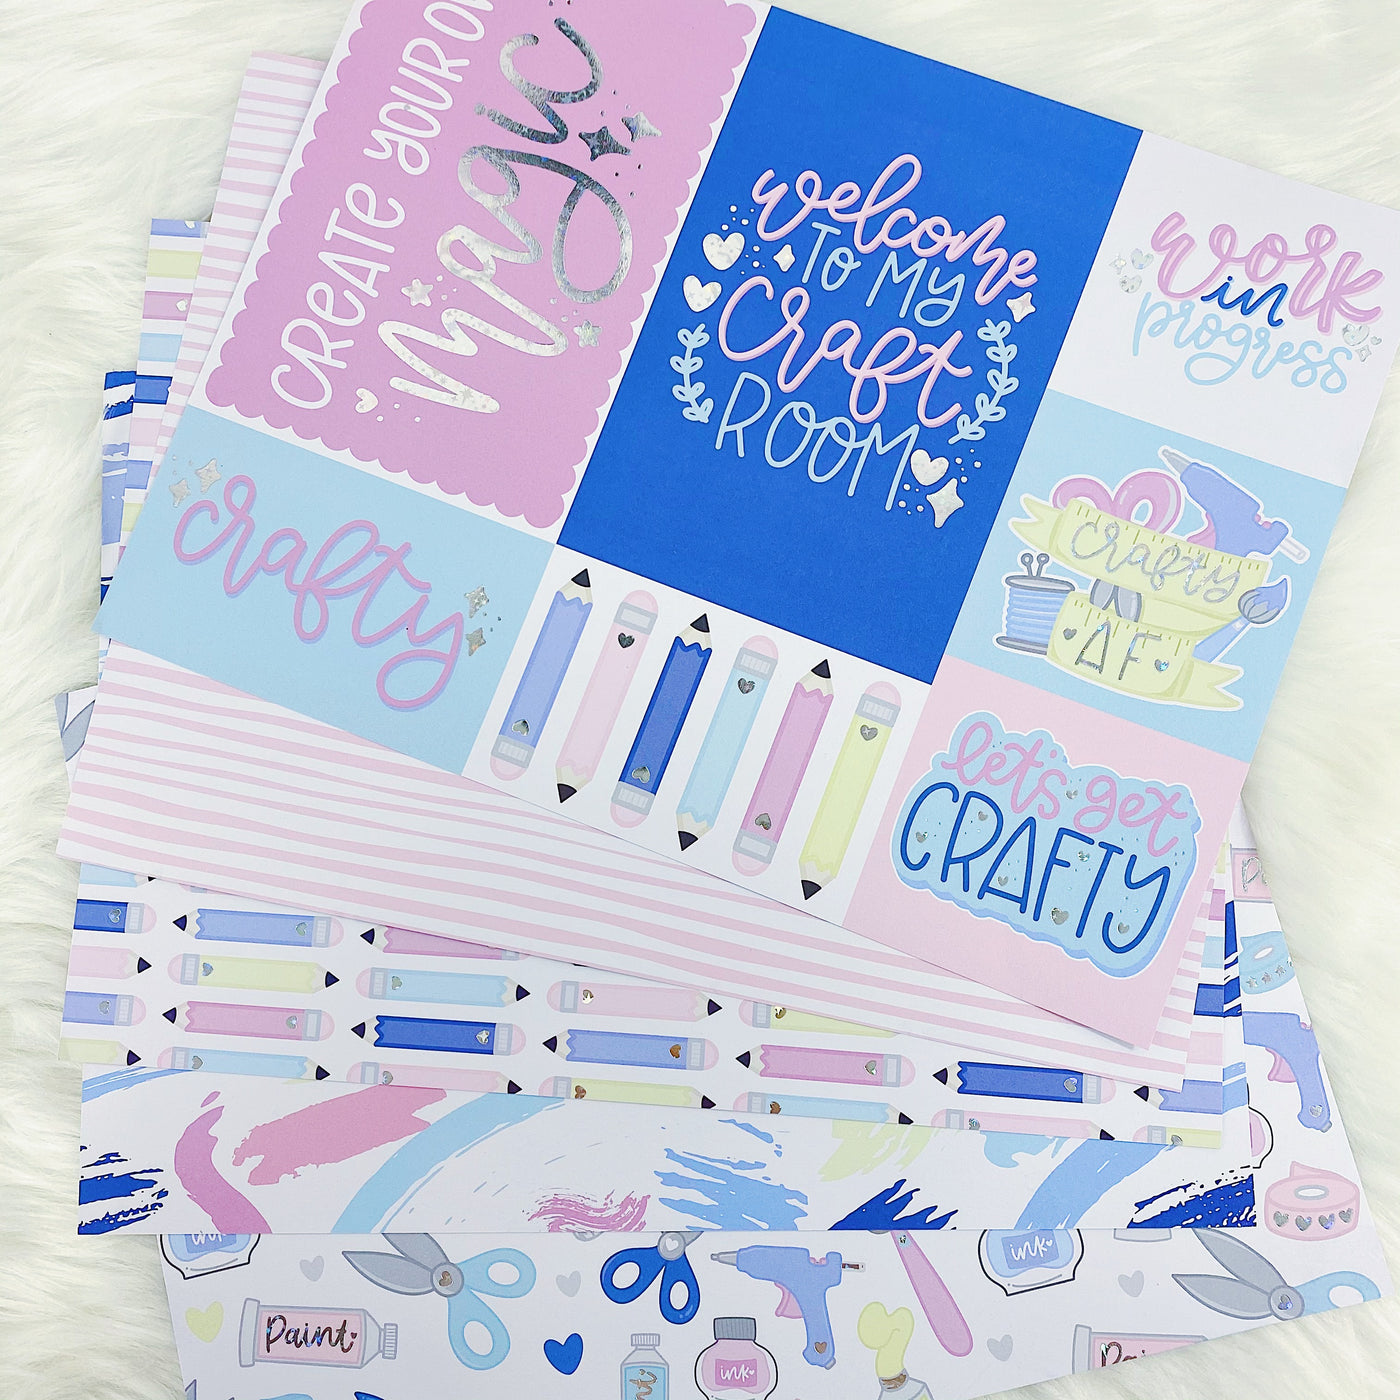 Crafty at Heart Papers + Acetates | Star Holo Foiled